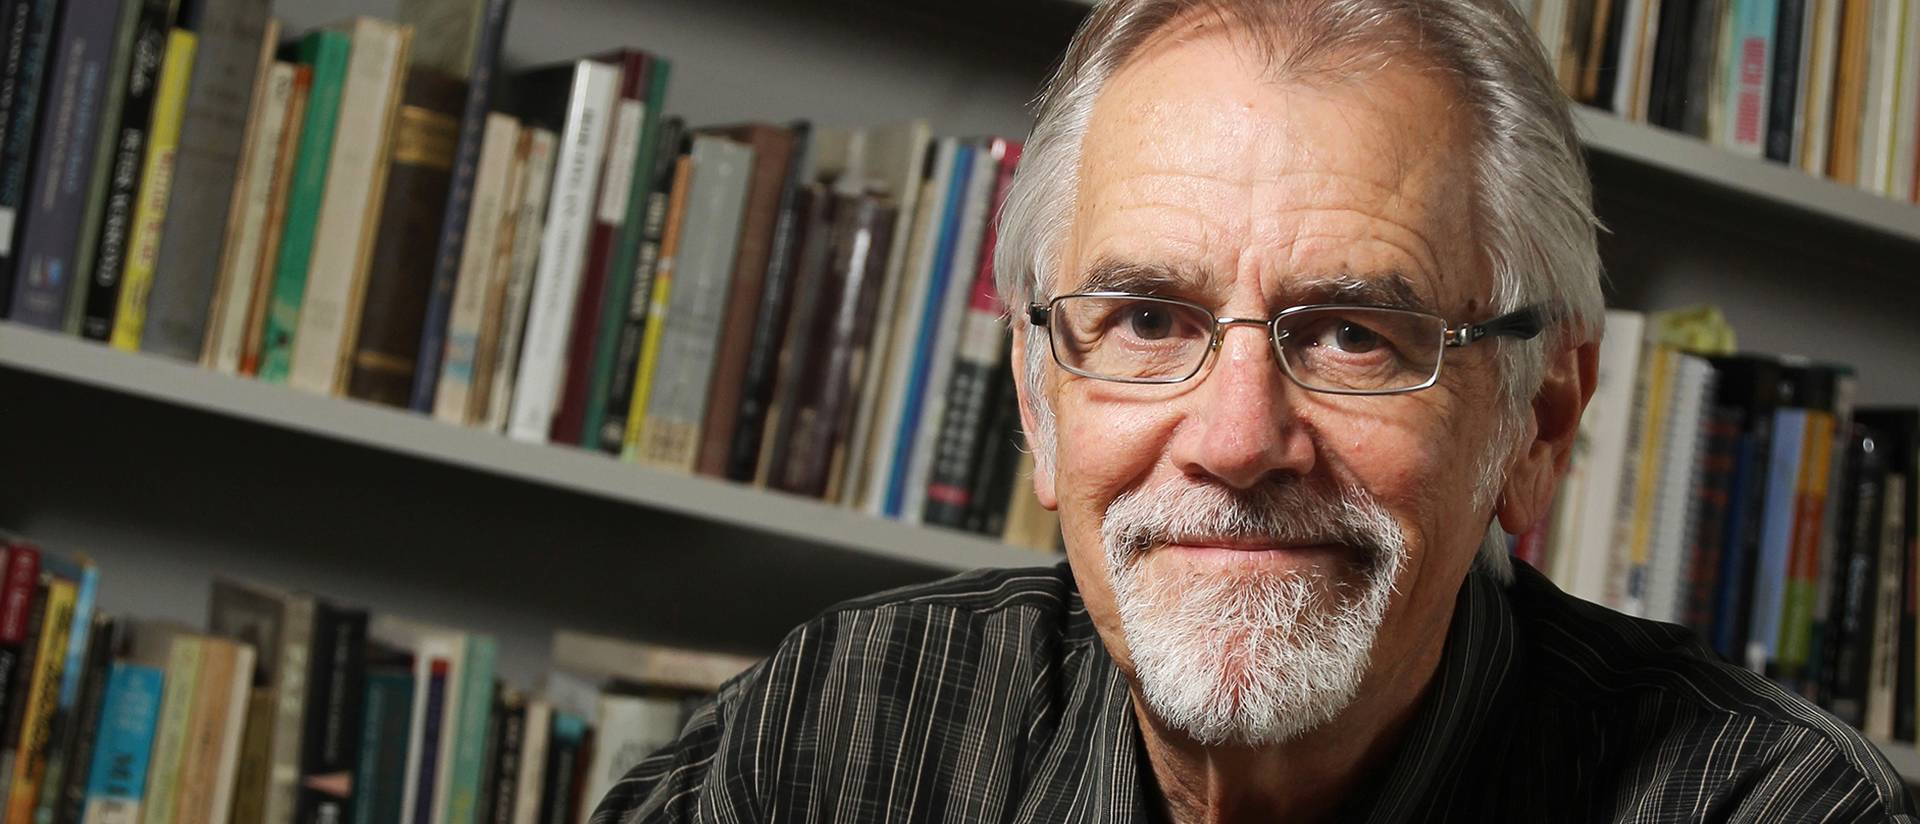 Max Garland, UW-Eau Claire professor of English, served as Wisconsin’s poet laureate from January 2013 through December 2014.